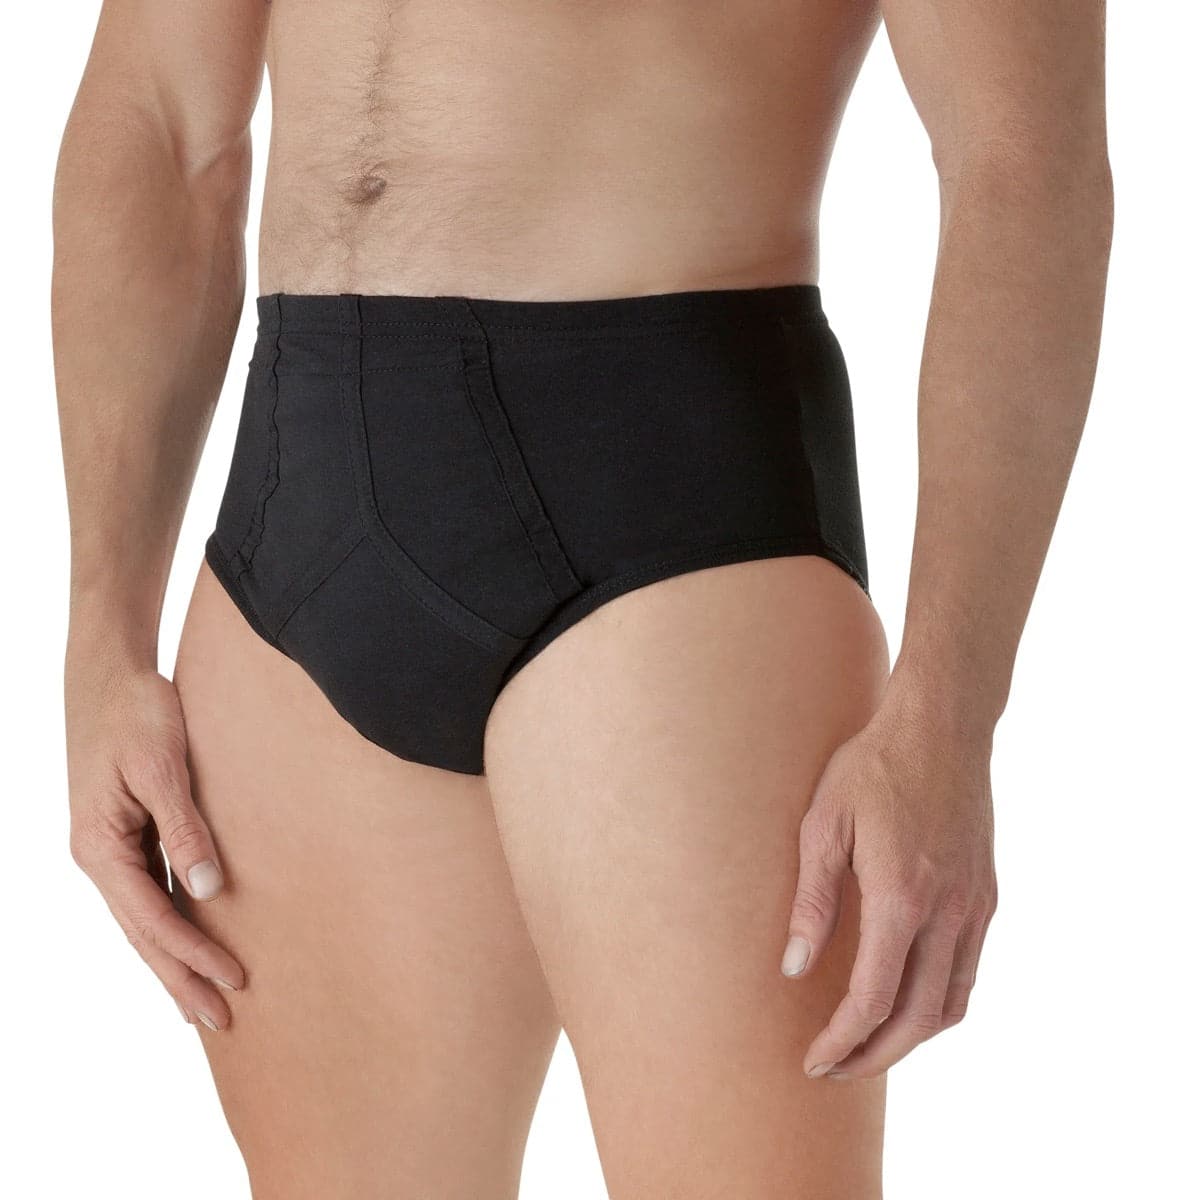 Pull-Up Briefs, Incontinence Products